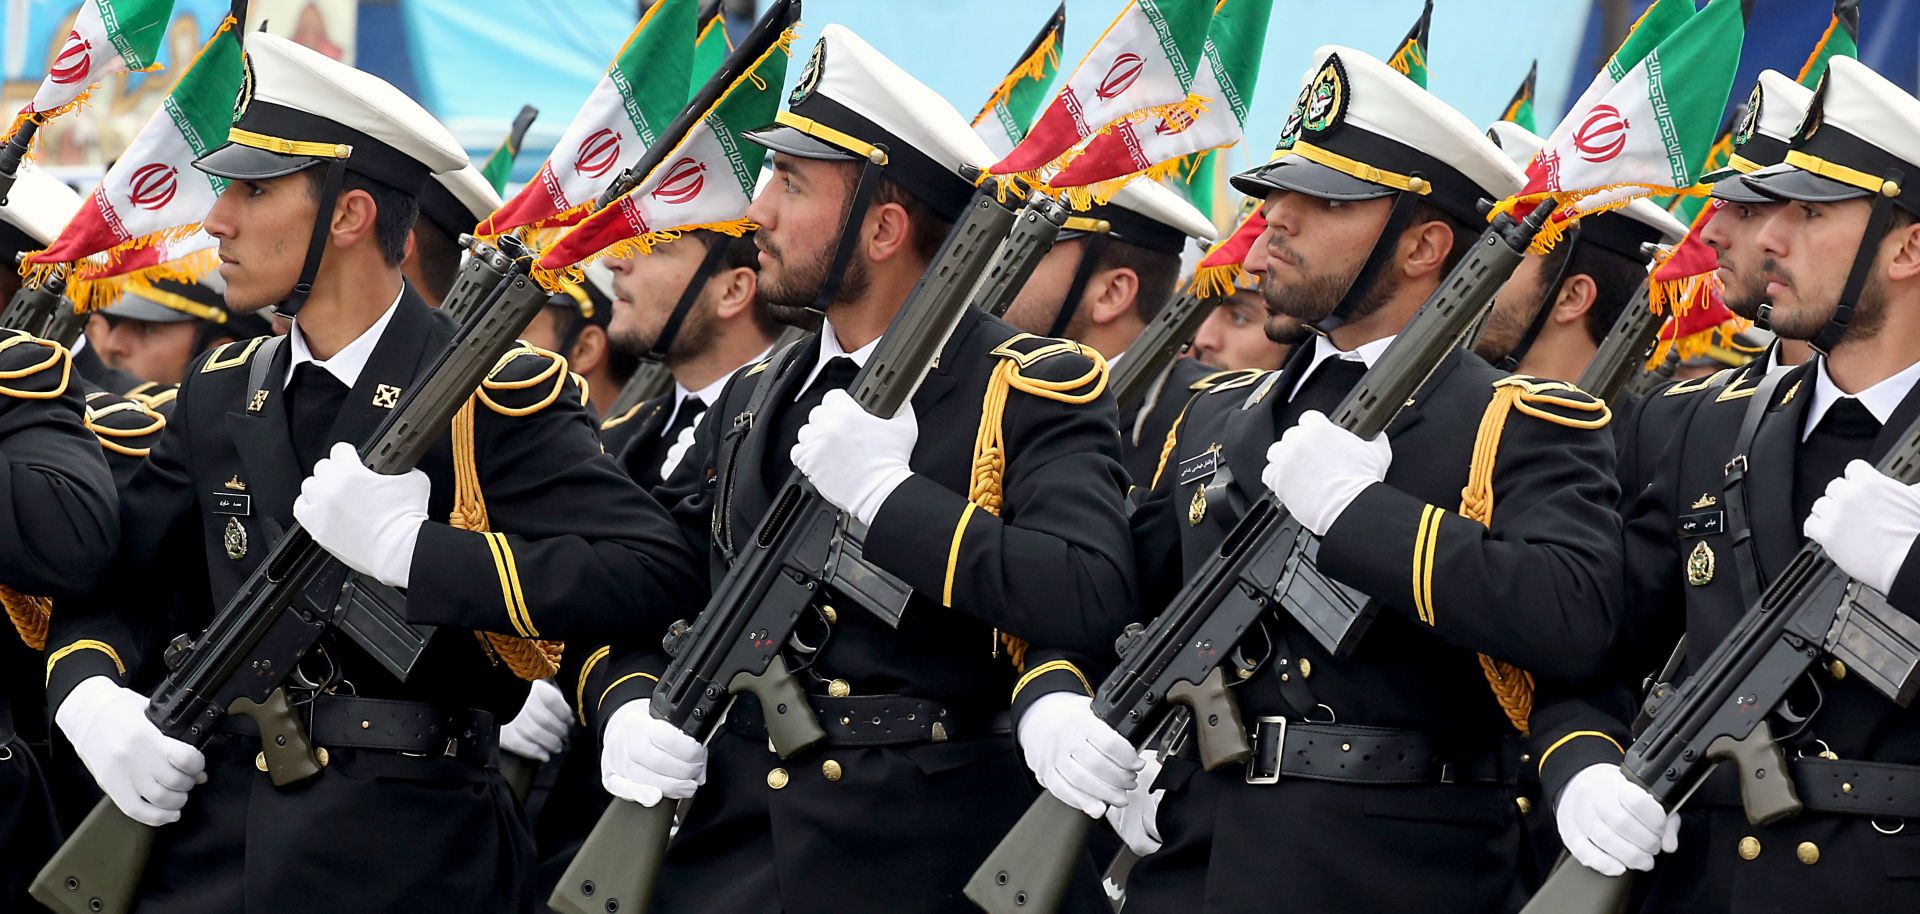 A military parade in the Iranian capital of Tehran on April 18, 2019.